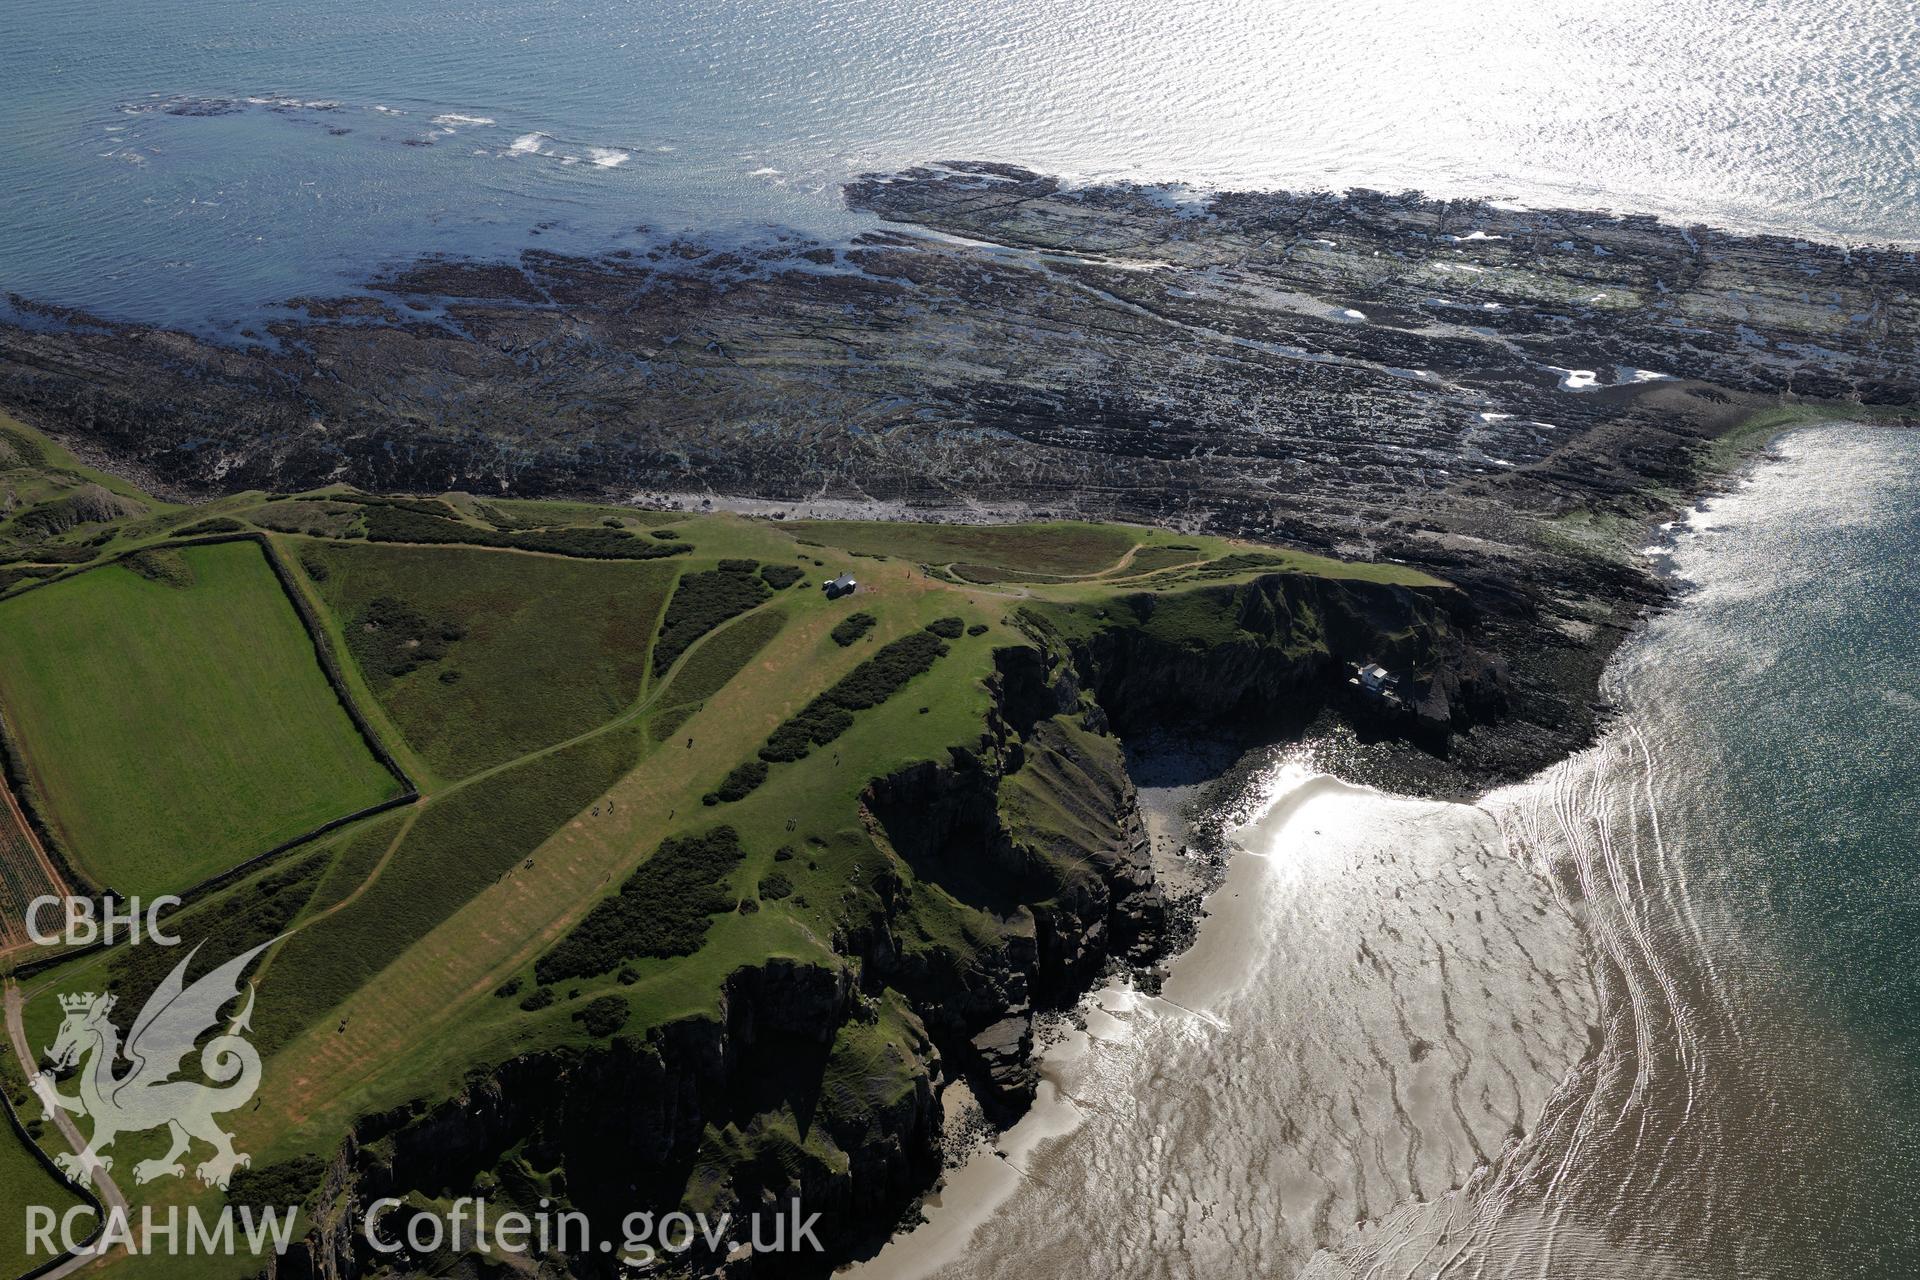 Kitchen Corner, at Worms Head, Rhossili, on the western shore of the Gower Peninsula. Oblique aerial photograph taken during the Royal Commission's programme of archaeological aerial reconnaissance by Toby Driver on 30th September 2015.